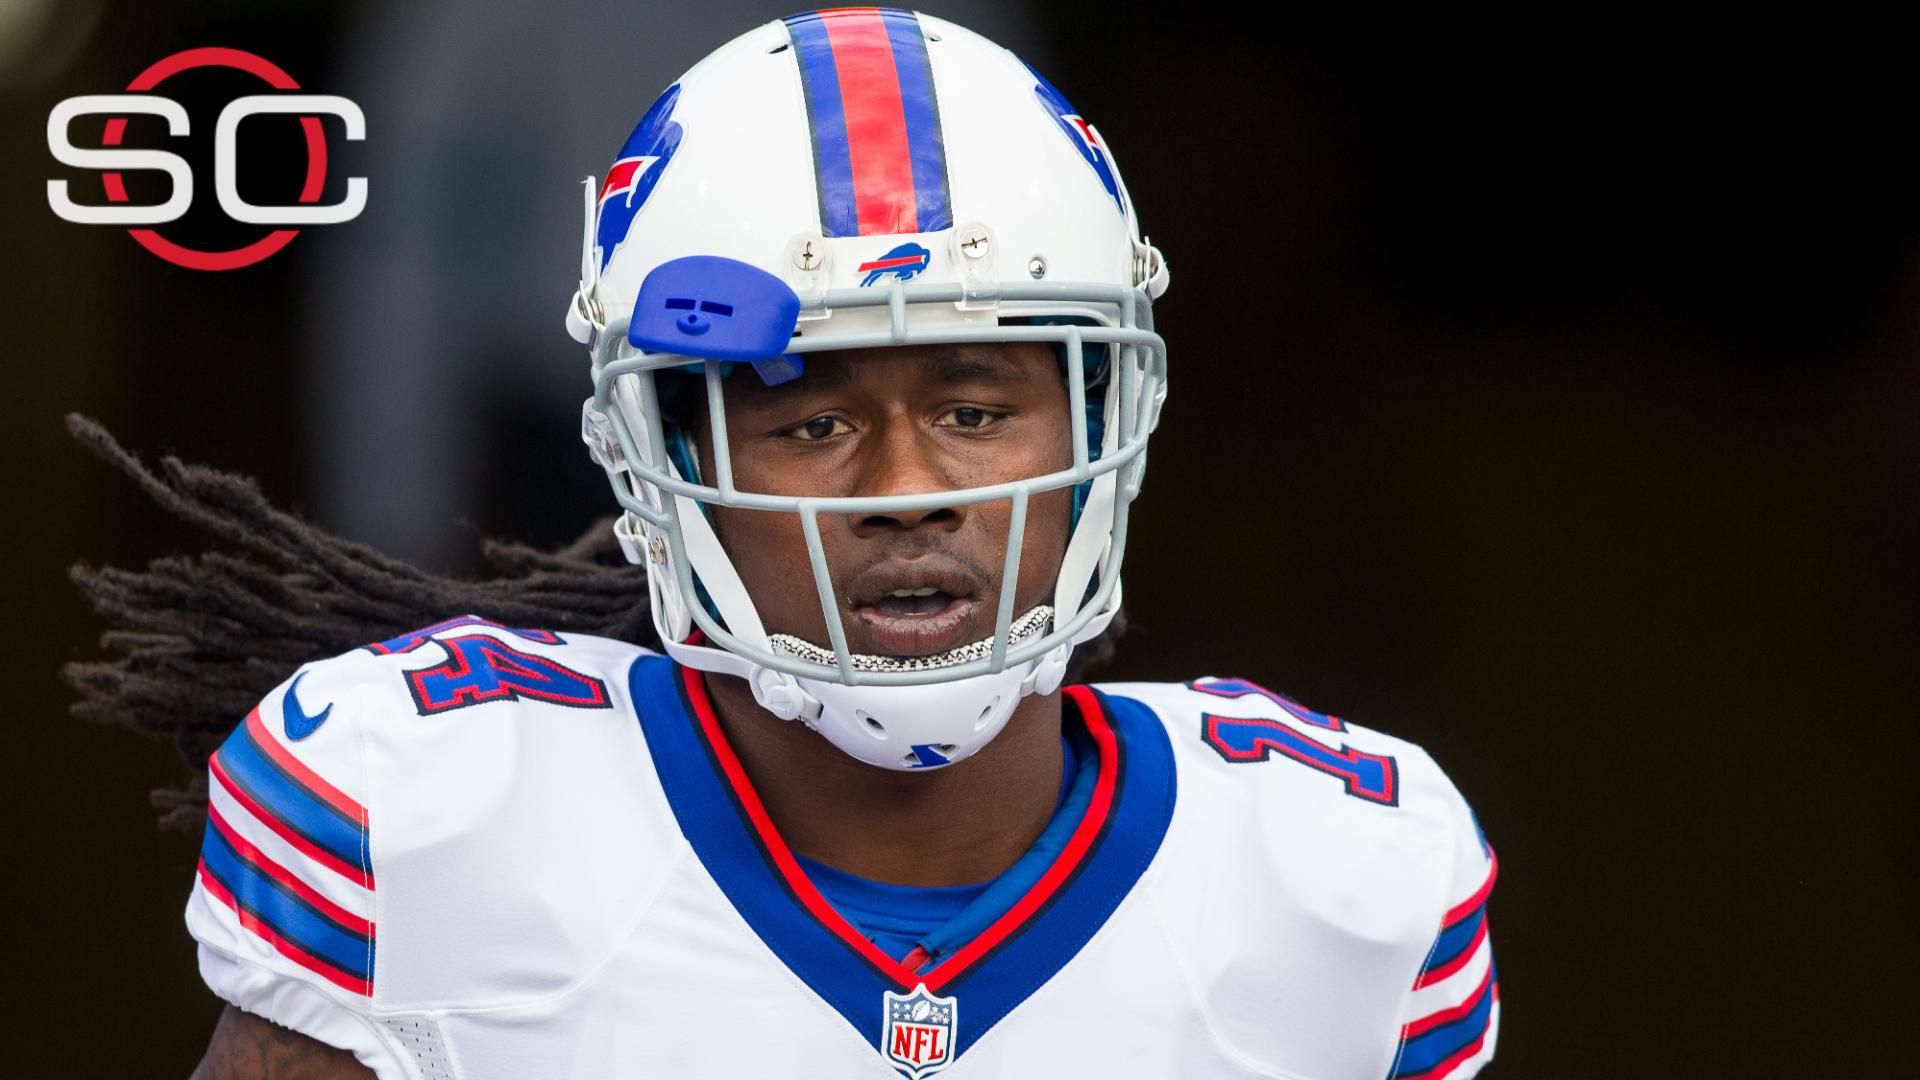 Sammy Watkins apologizes for calling fans 'losers'